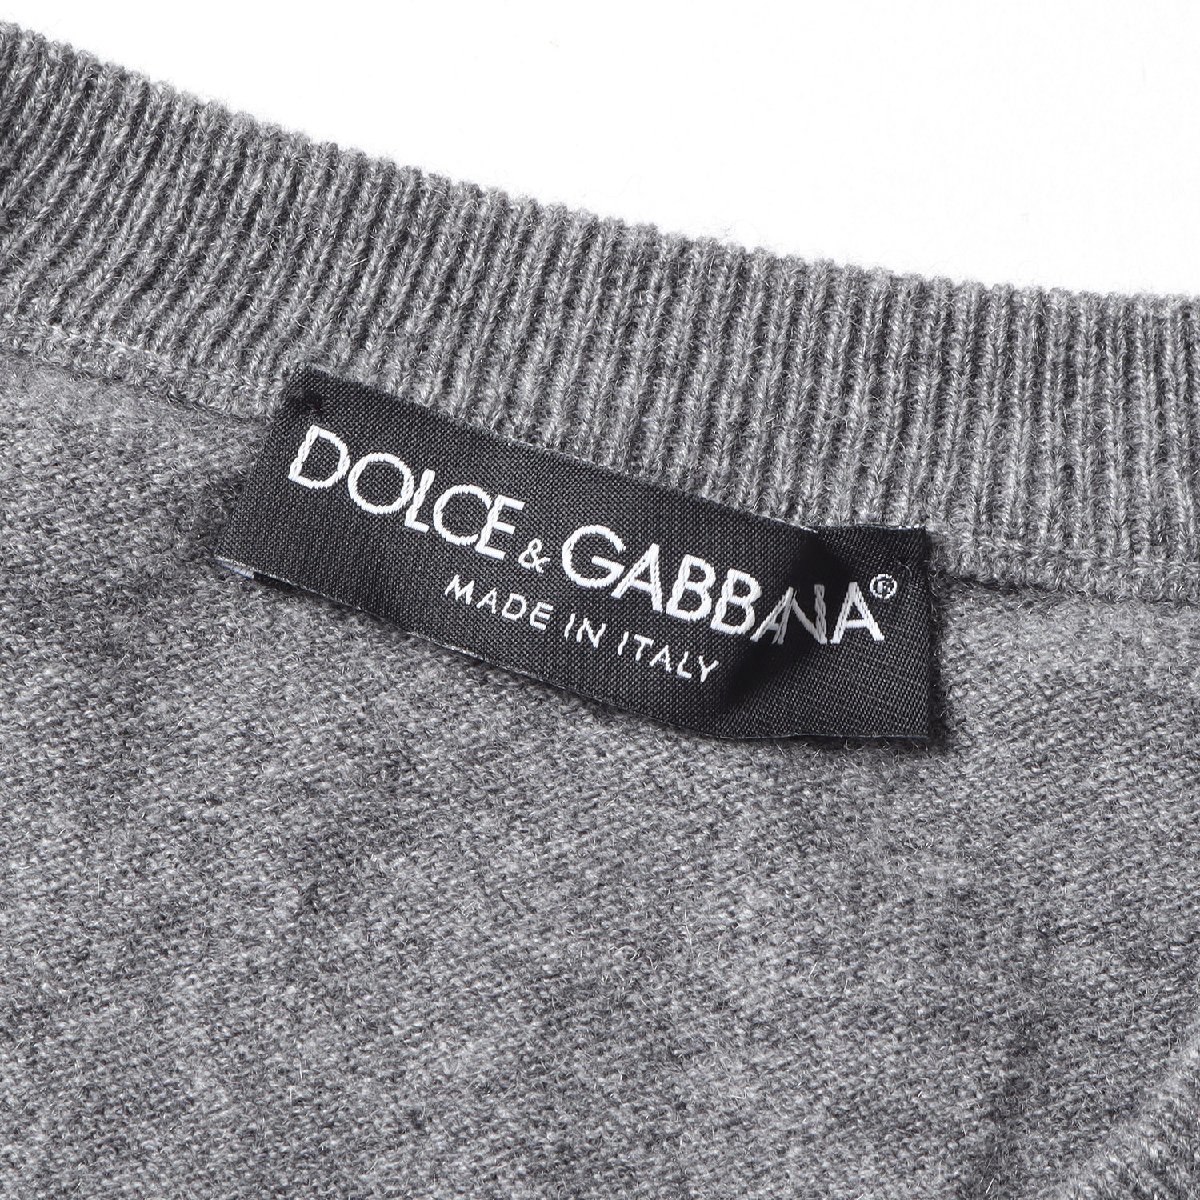 DOLCE&GABBANA Dolce & Gabbana knitted size :56 crew neck cashmere knitted sweater gray Italy made brand casual 